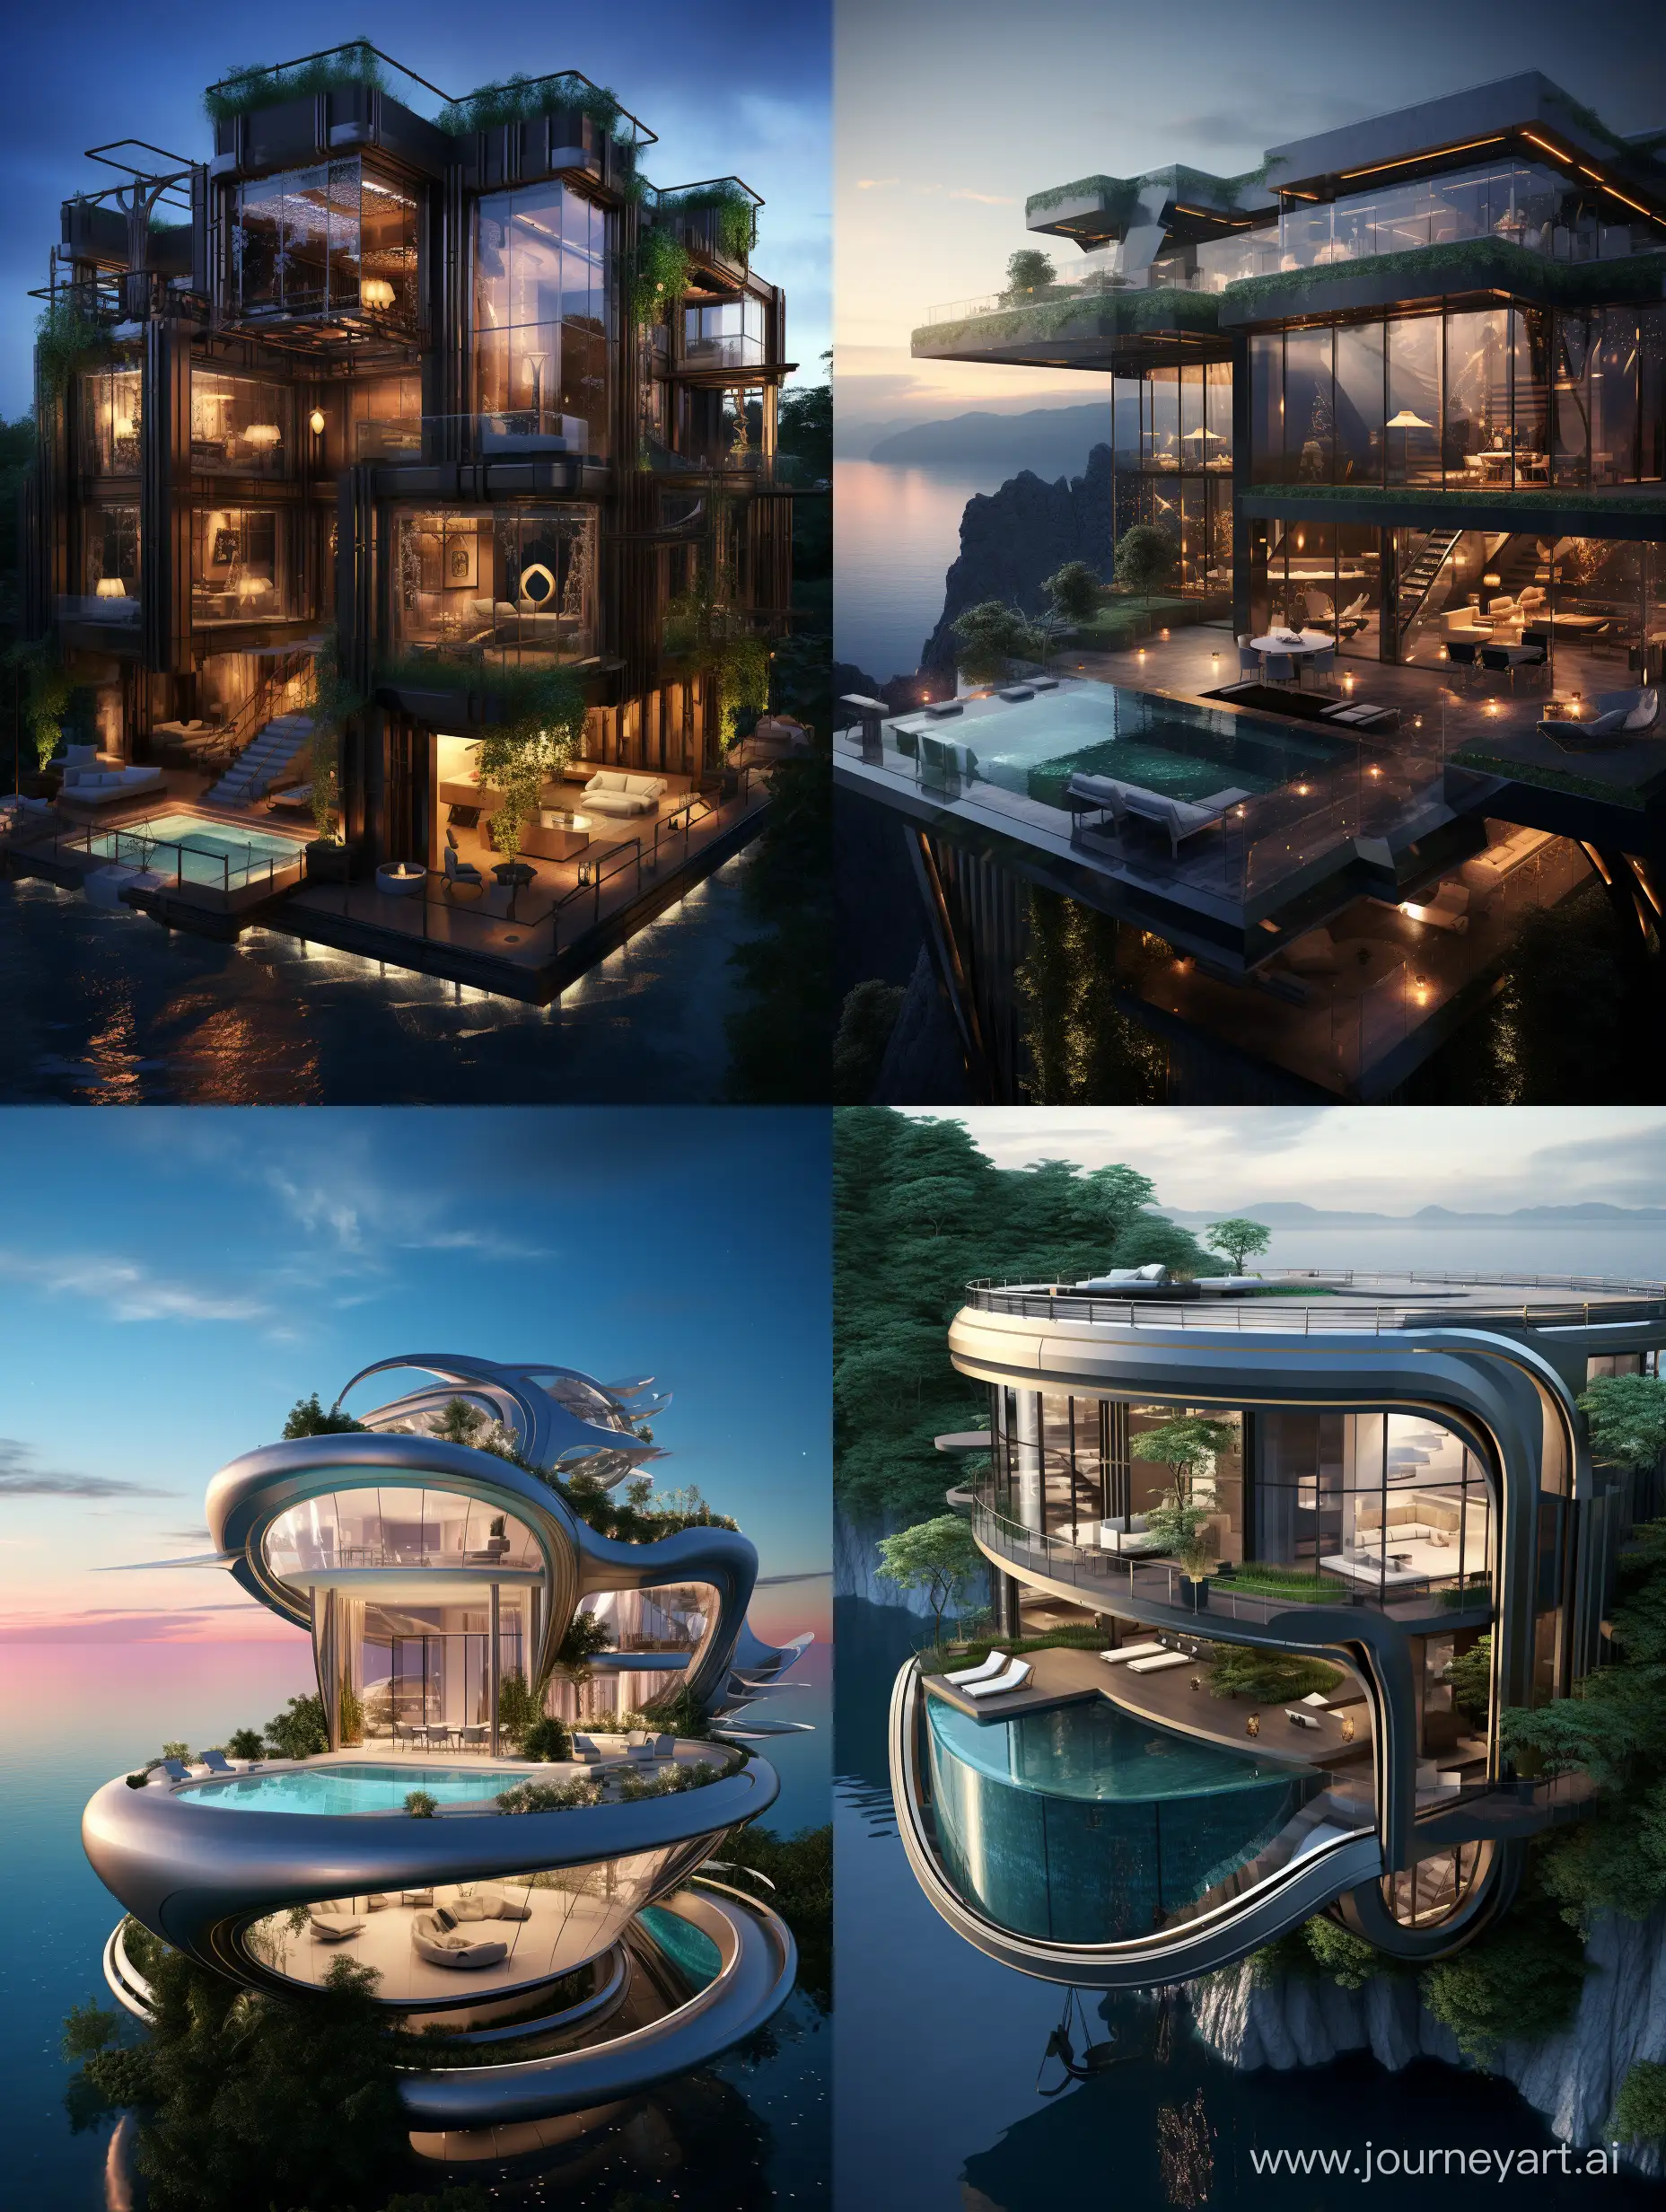 Luxurious-MATRIXInspired-Building-Concepts-Futuristic-Architectural-Designs-in-AR-34